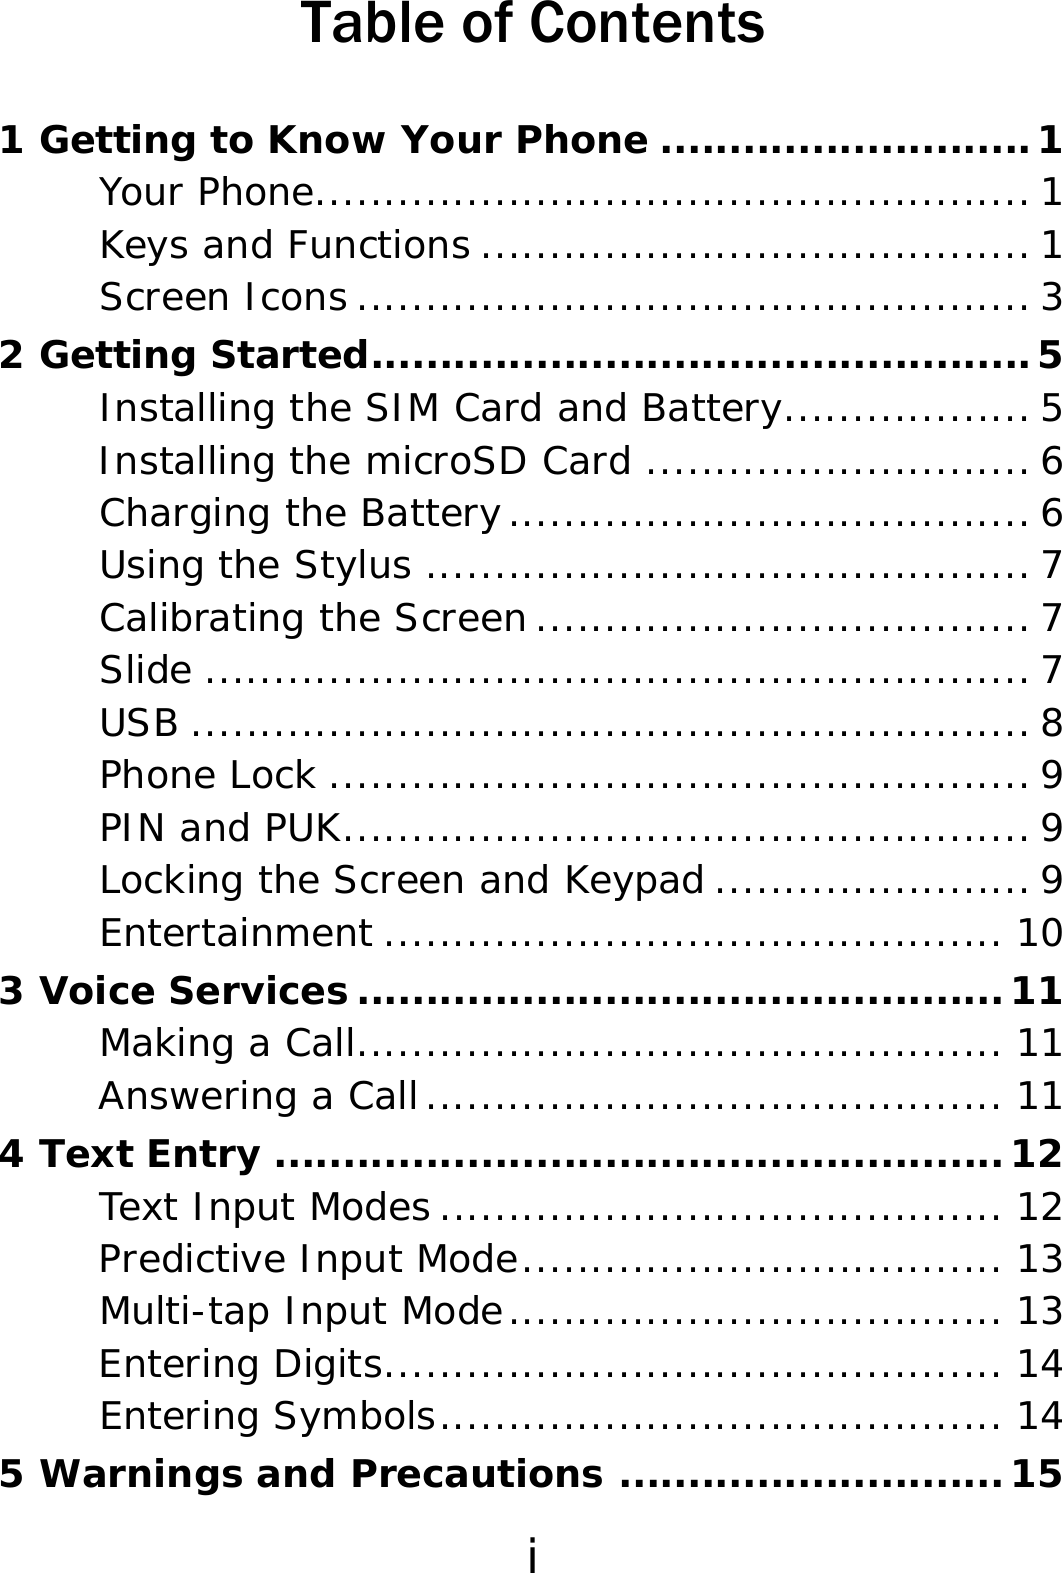 i Table of Contents 1 Getting to Know Your Phone ...........................1 Your Phone.................................................... 1 Keys and Functions ........................................ 1 Screen Icons ................................................. 3 2 Getting Started................................................5 Installing the SIM Card and Battery.................. 5 Installing the microSD Card ............................ 6 Charging the Battery...................................... 6 Using the Stylus ............................................ 7 Calibrating the Screen .................................... 7 Slide ............................................................ 7 USB ............................................................. 8 Phone Lock ................................................... 9 PIN and PUK.................................................. 9 Locking the Screen and Keypad ....................... 9 Entertainment ............................................. 10 3 Voice Services...............................................11 Making a Call............................................... 11 Answering a Call.......................................... 11 4 Text Entry .....................................................12 Text Input Modes ......................................... 12 Predictive Input Mode................................... 13 Multi-tap Input Mode.................................... 13 Entering Digits............................................. 14 Entering Symbols......................................... 14 5 Warnings and Precautions ............................15 